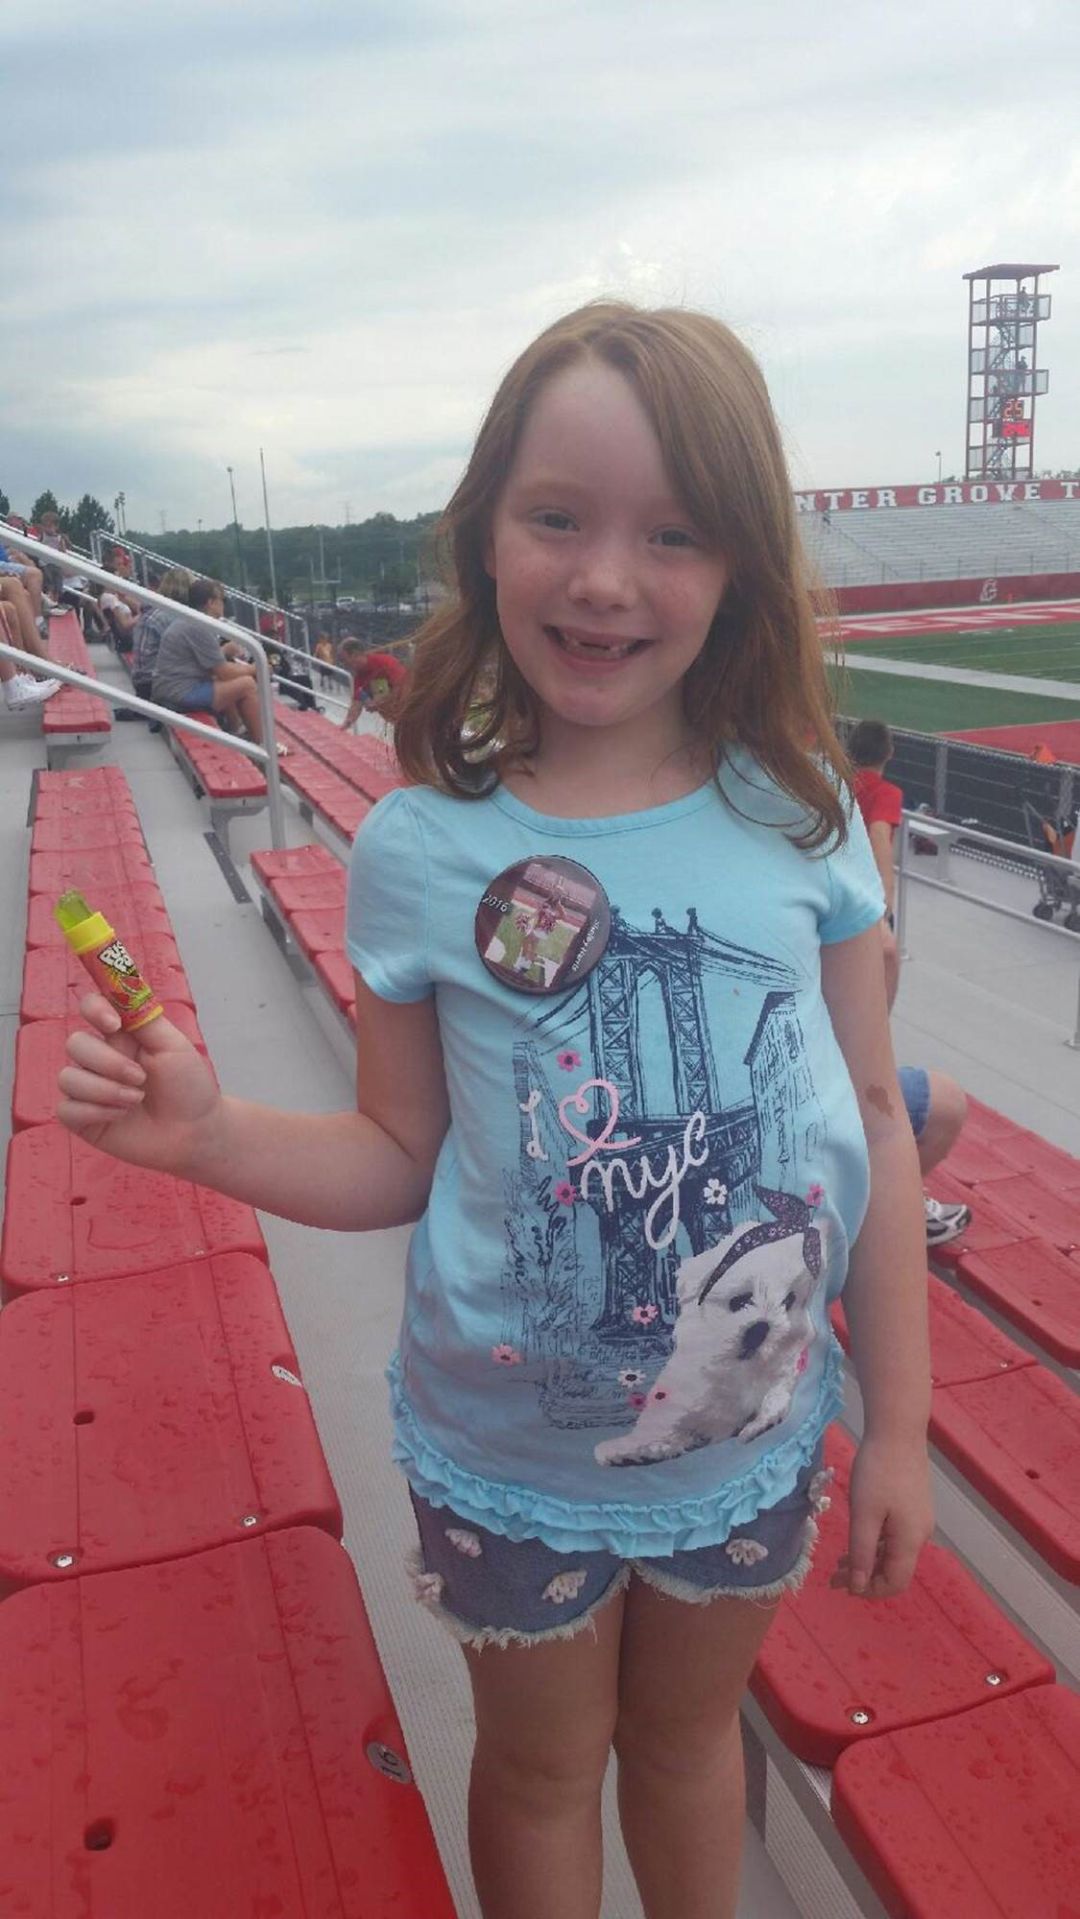 2:45 p.m. update: Amber Alert for Greenwood girl cancelled | Indiana